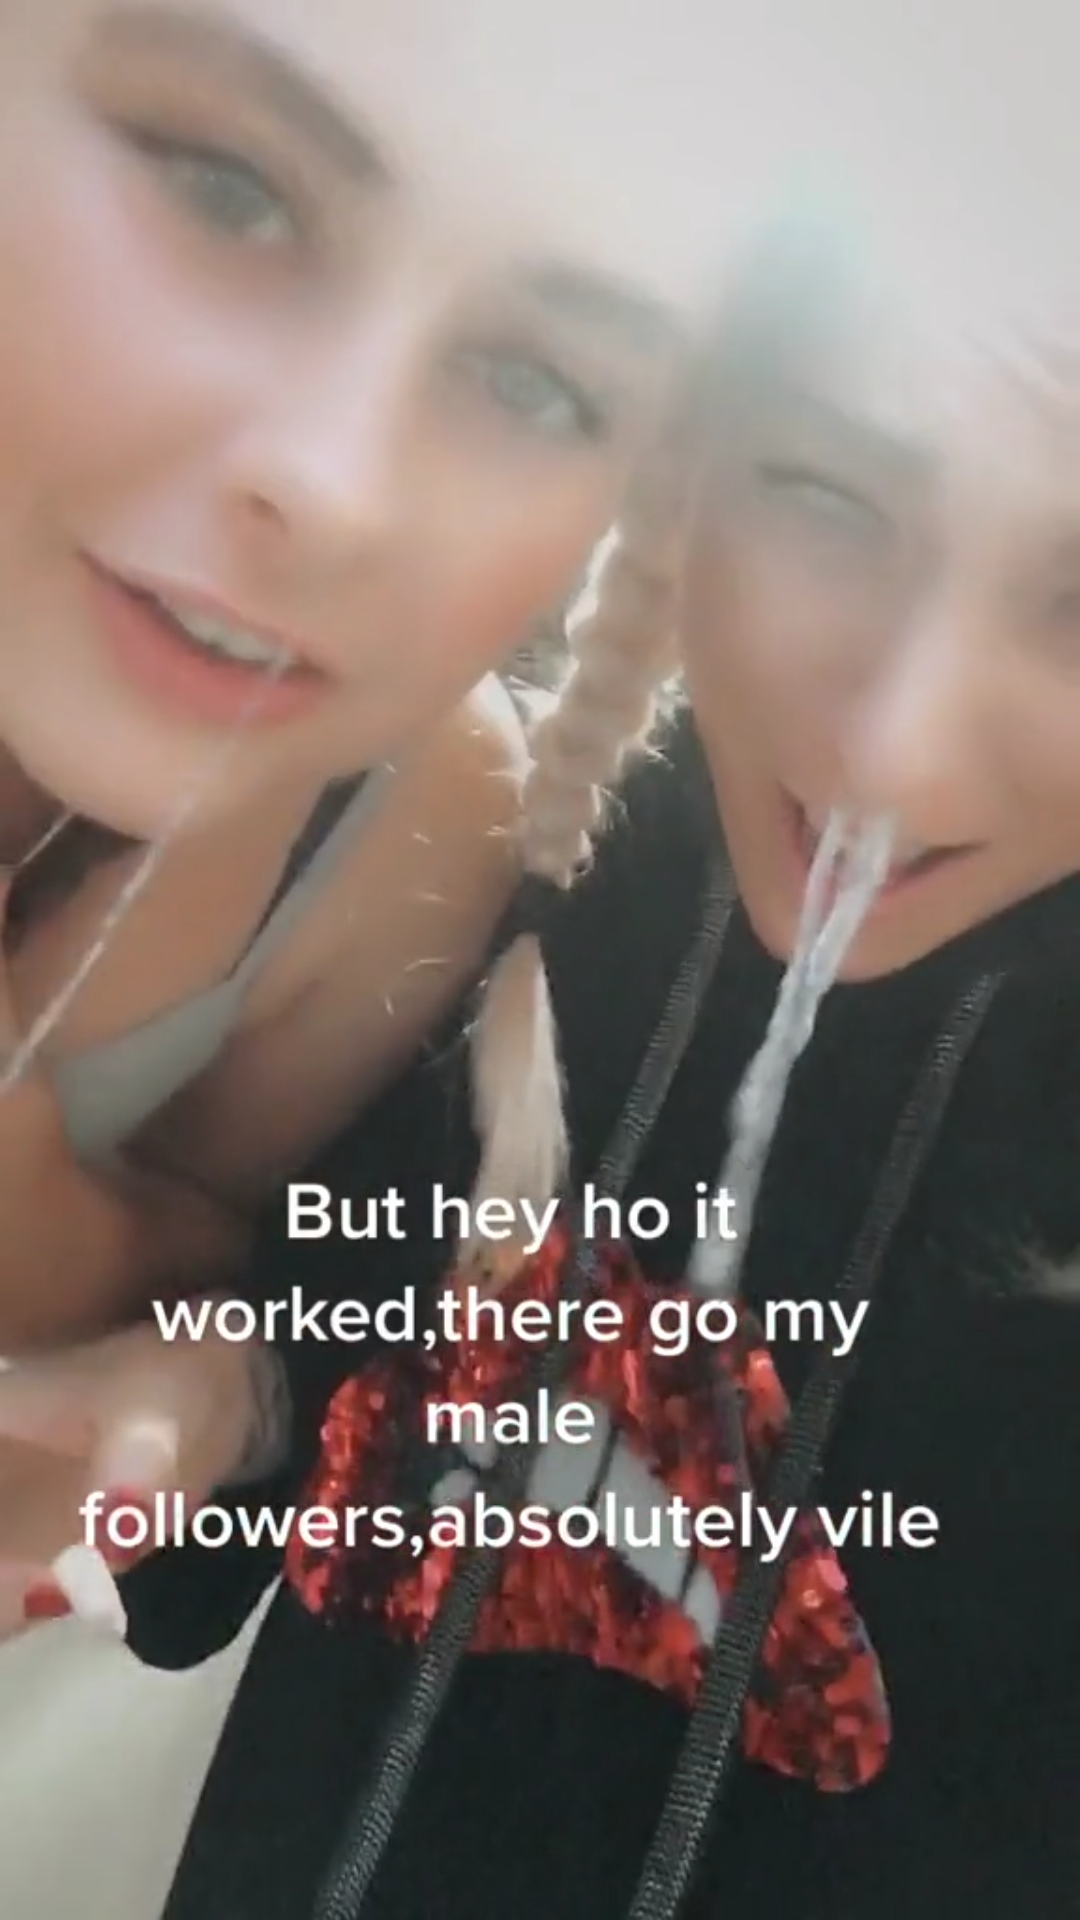 Two snot girls laughing and showing their snot